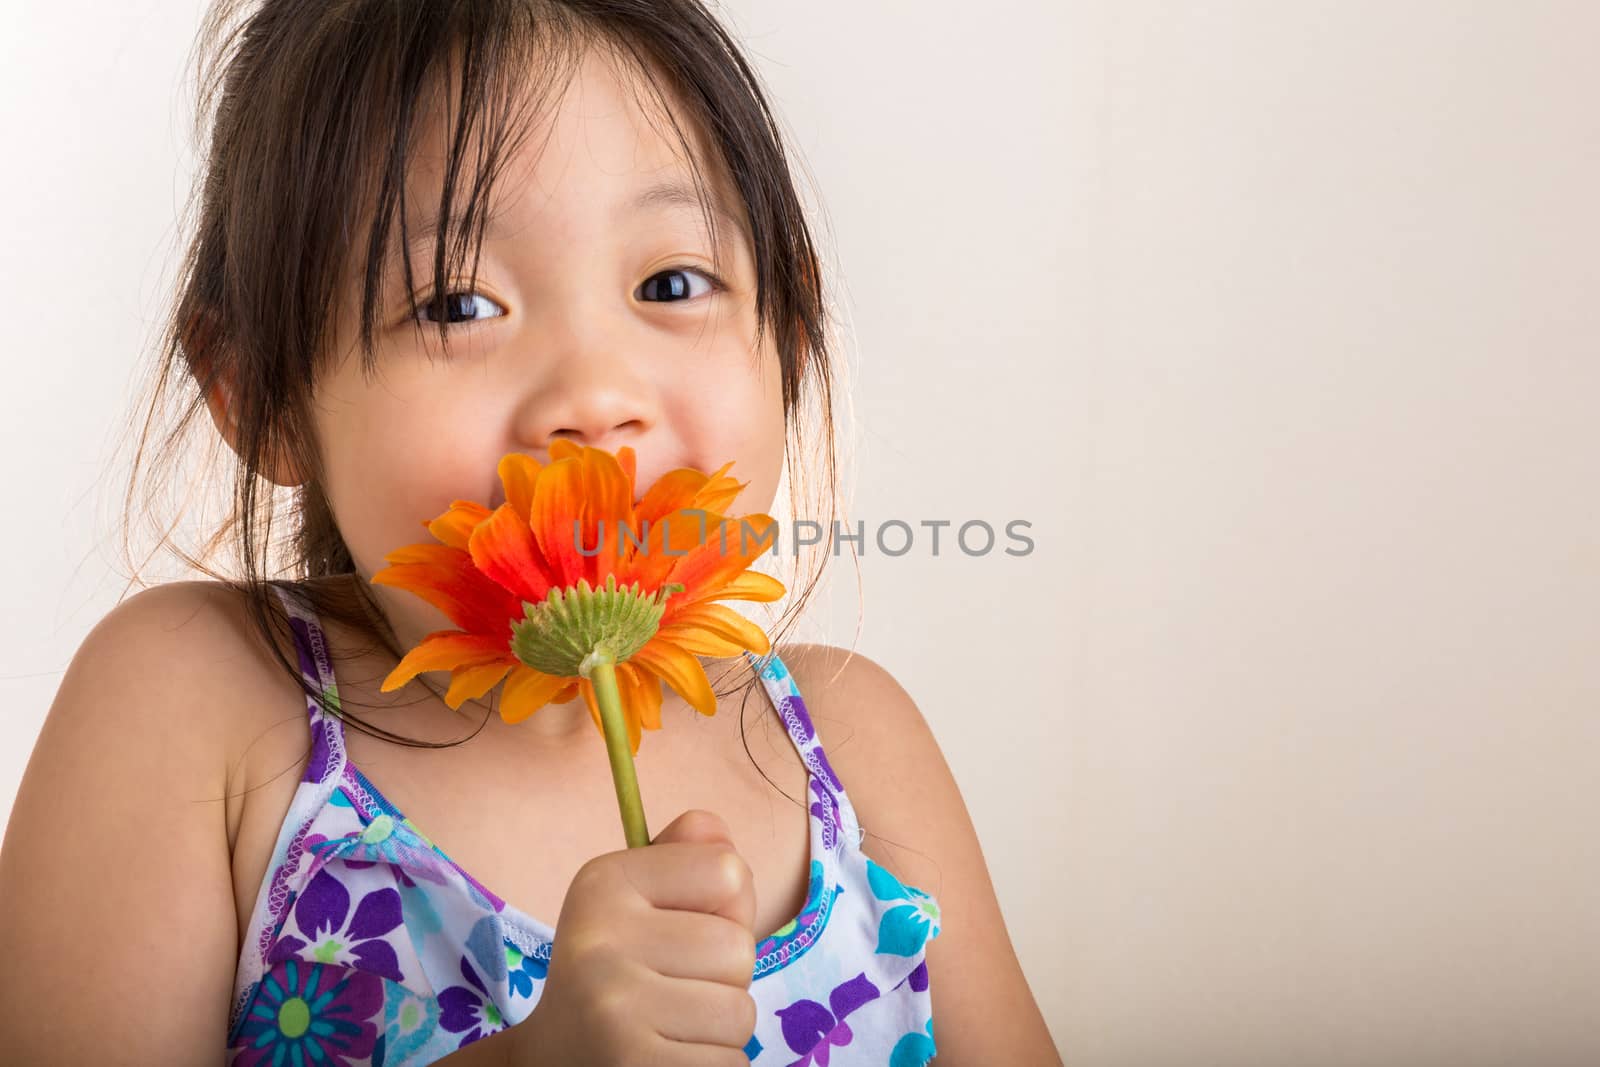 Child is holding sunflower in her hands background.